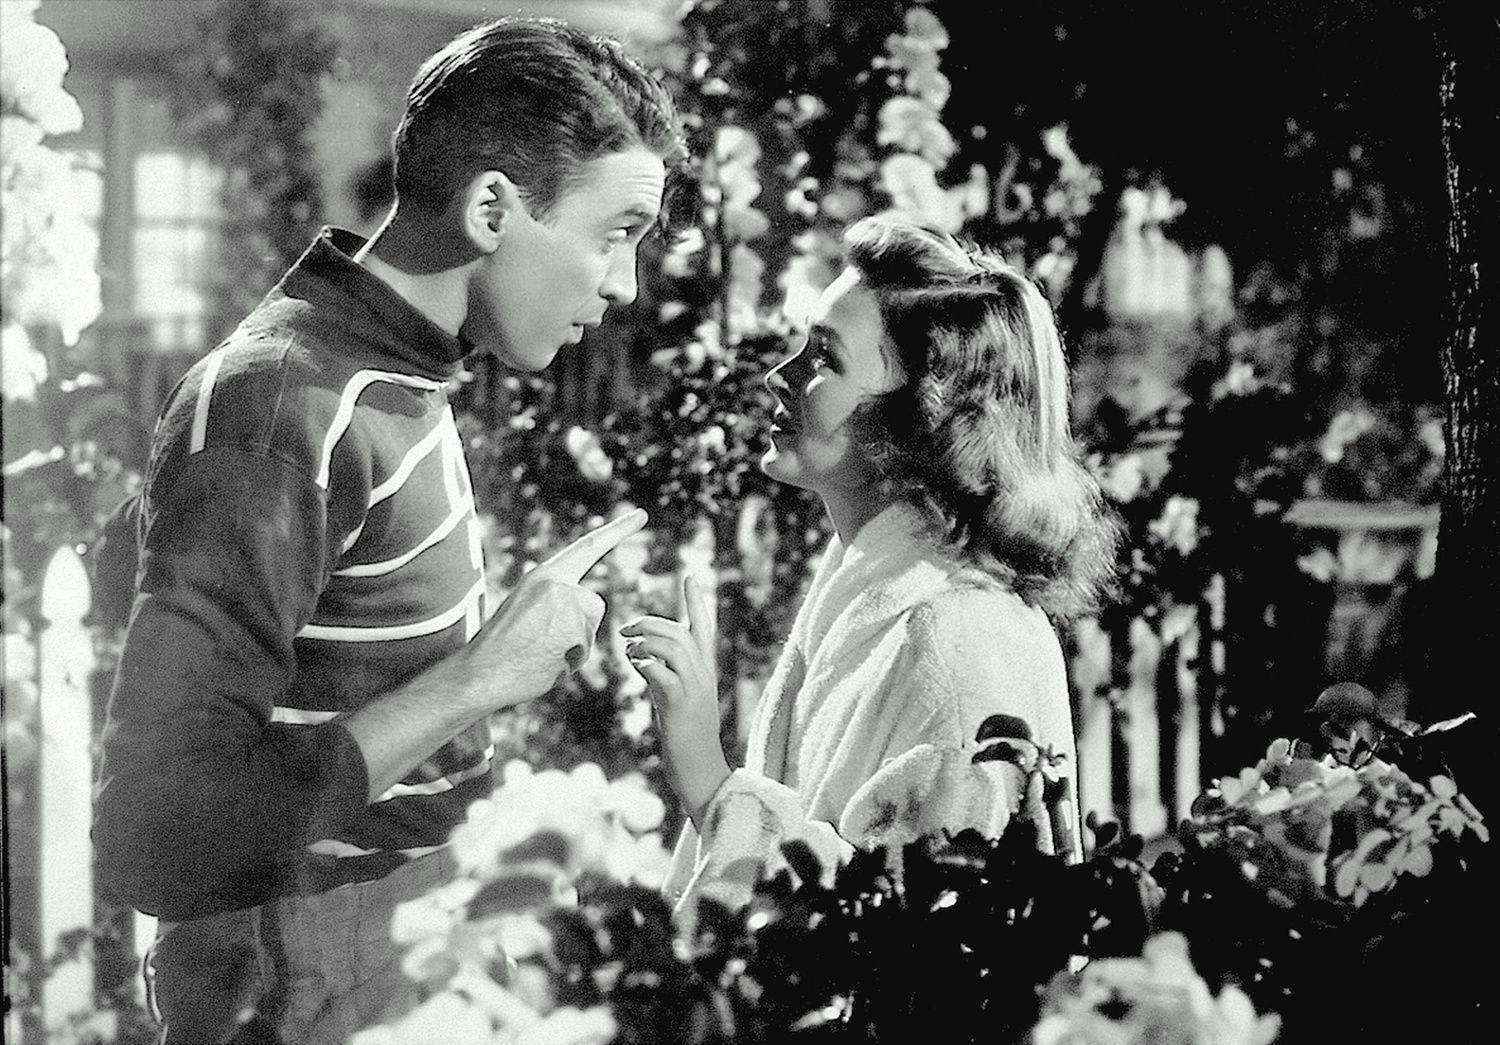 An Endearing Scene from the Movie “It’s a Wonderful Life” Wallpaper